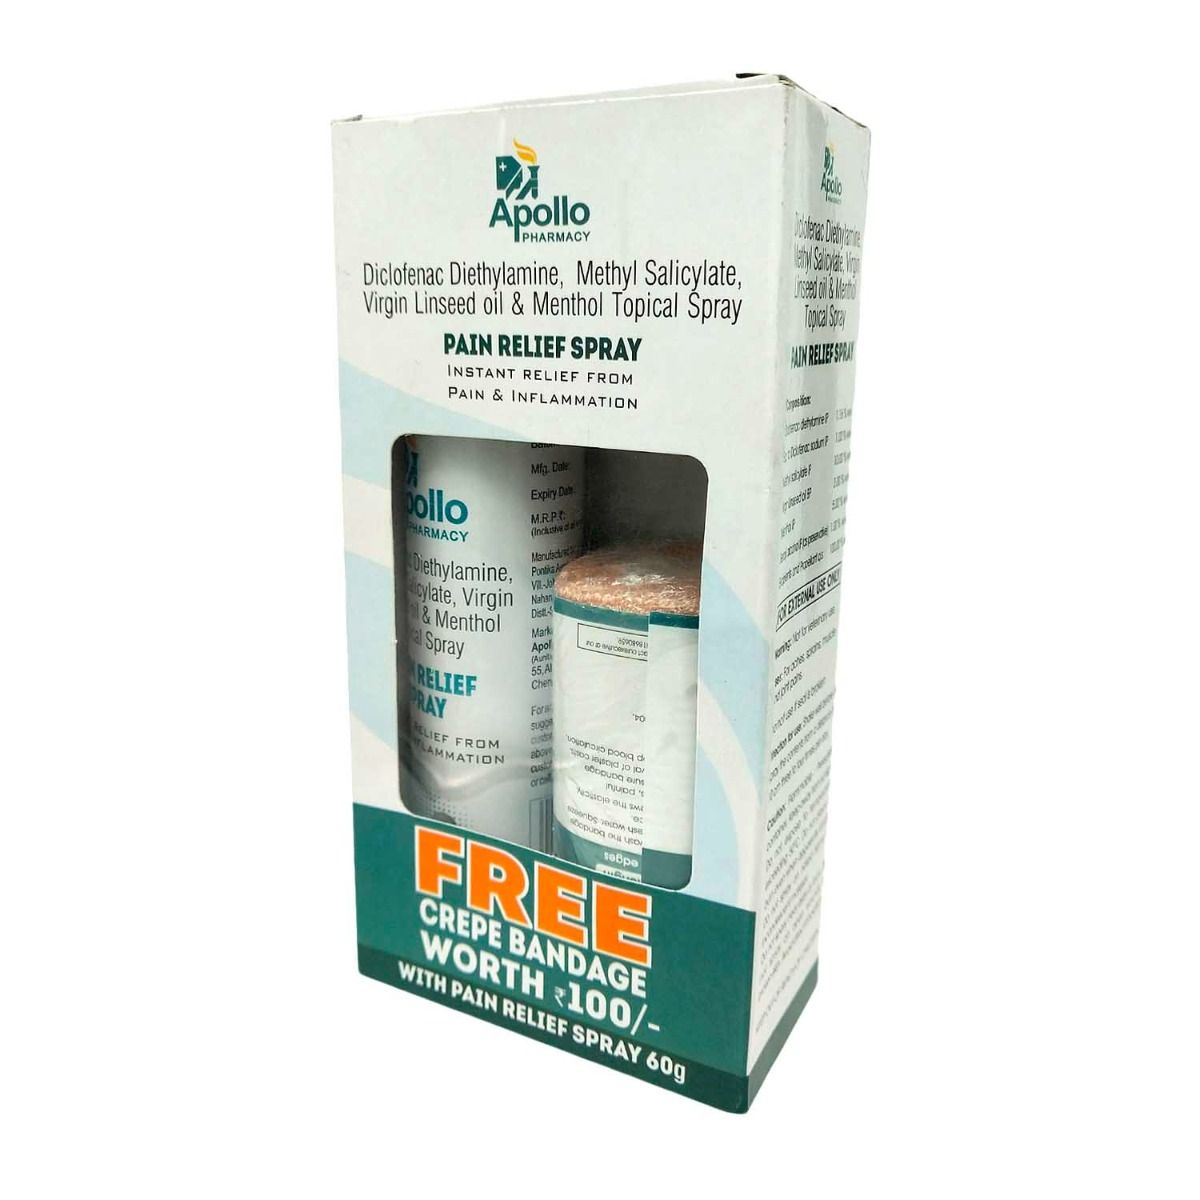 Buy Apollo Pharmacy Pain Relief Spray with Free Crepe Bandage, 60 gm Online